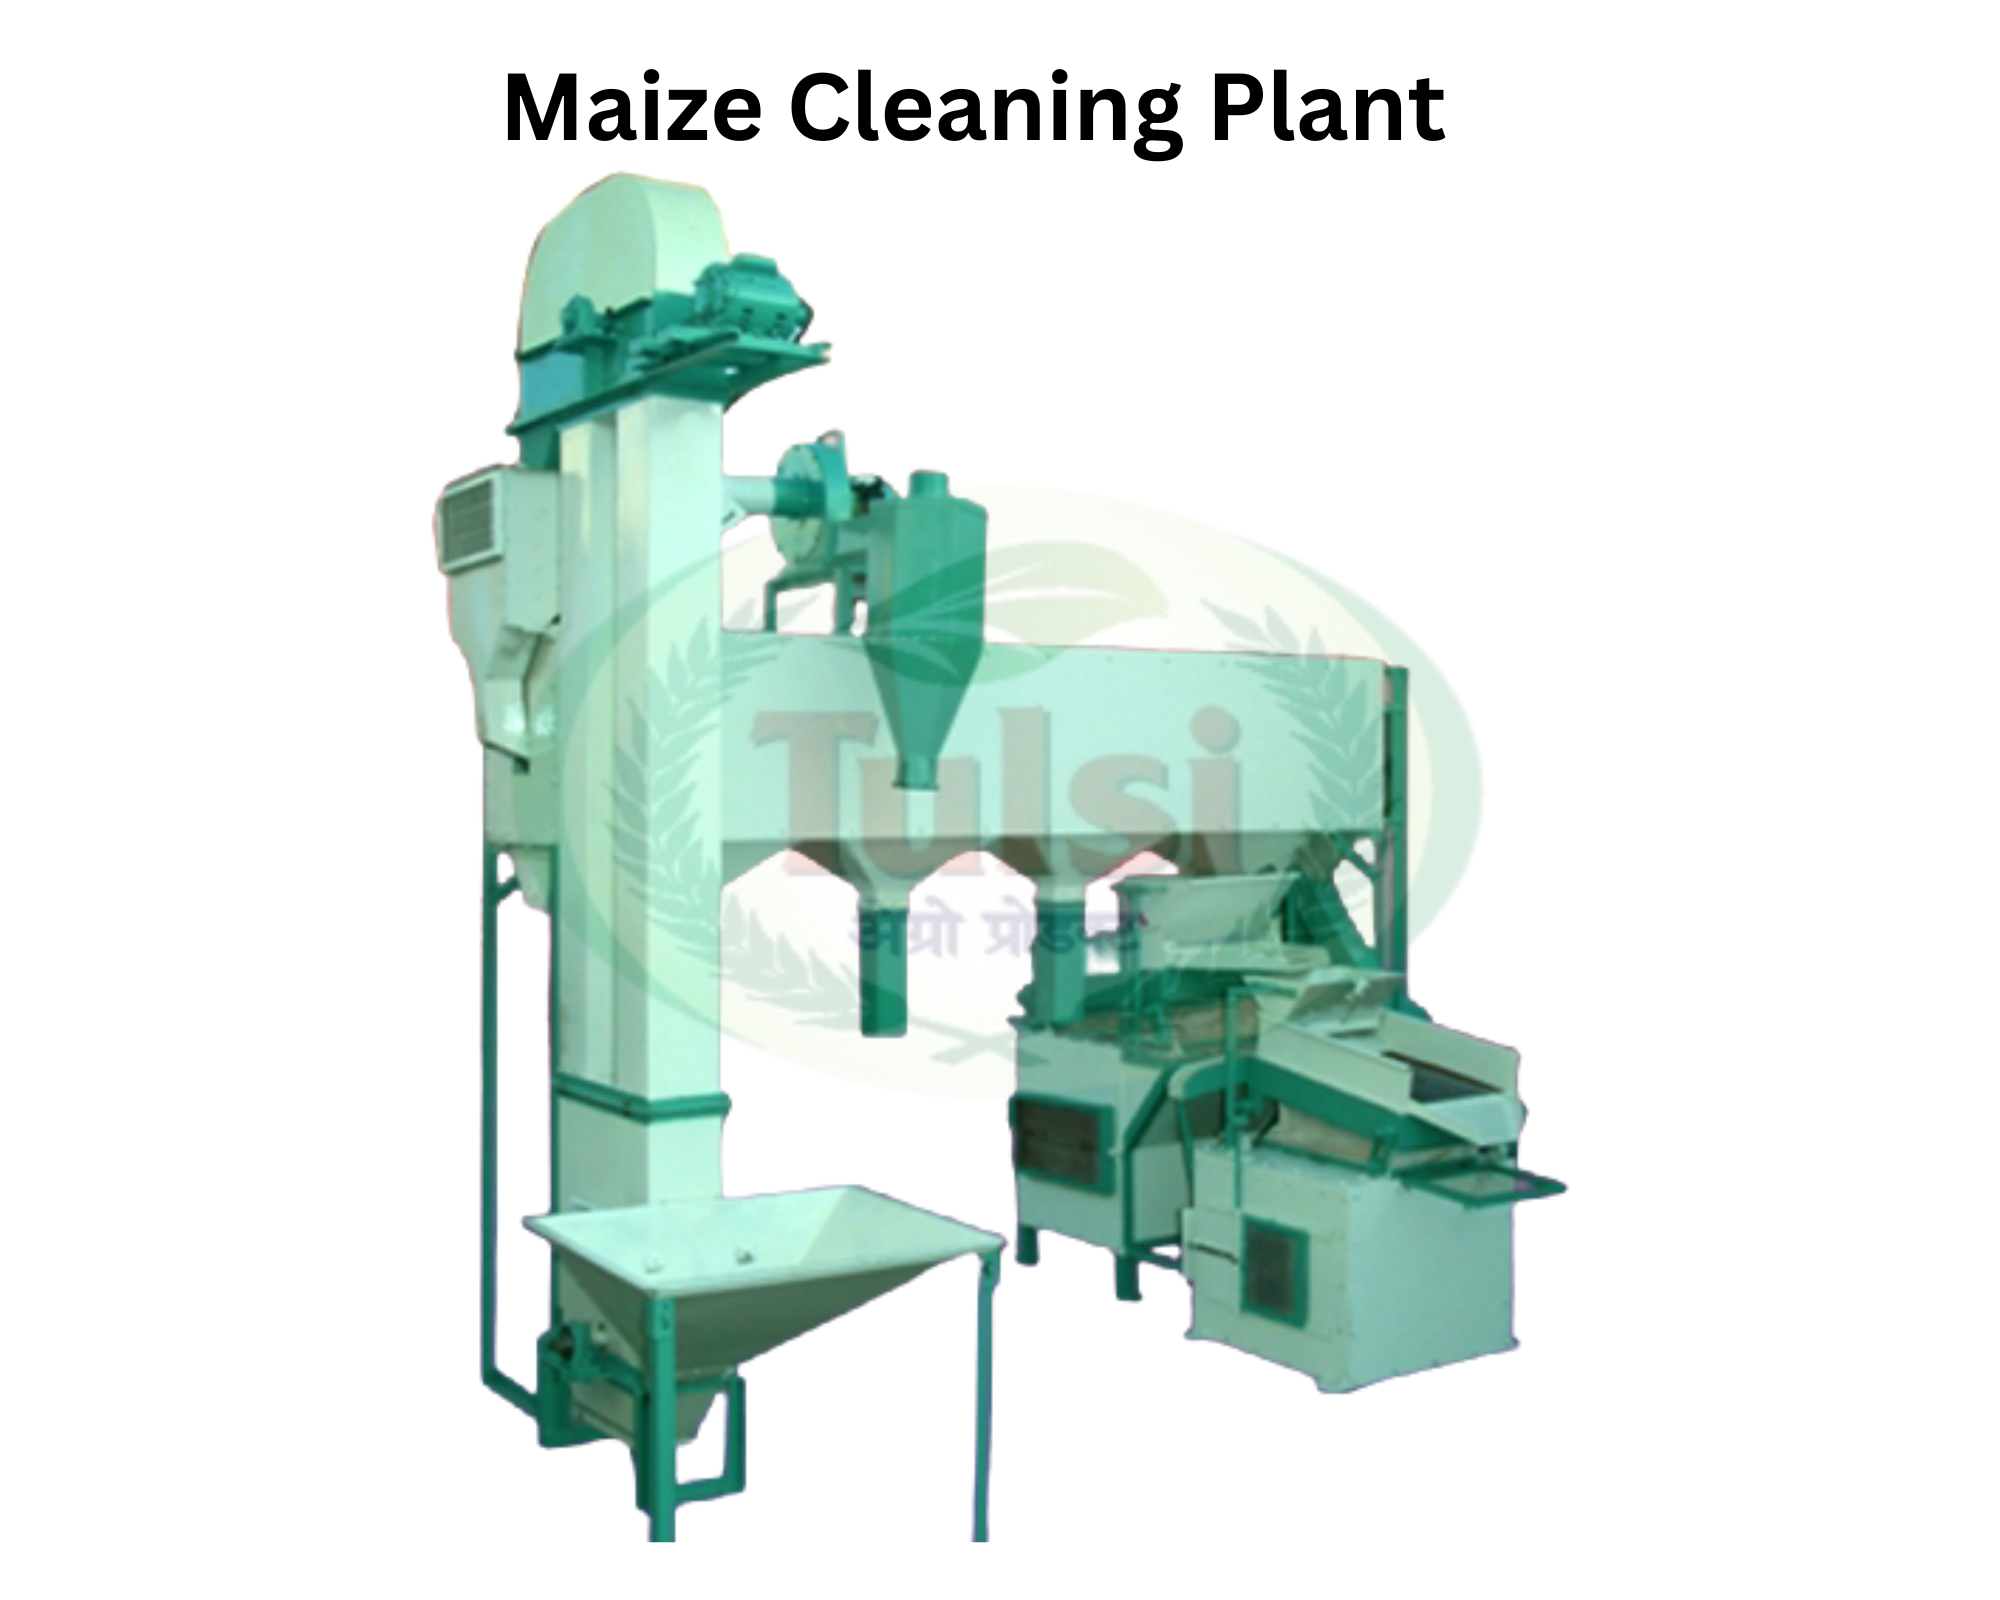 Maize Cleaning Plant